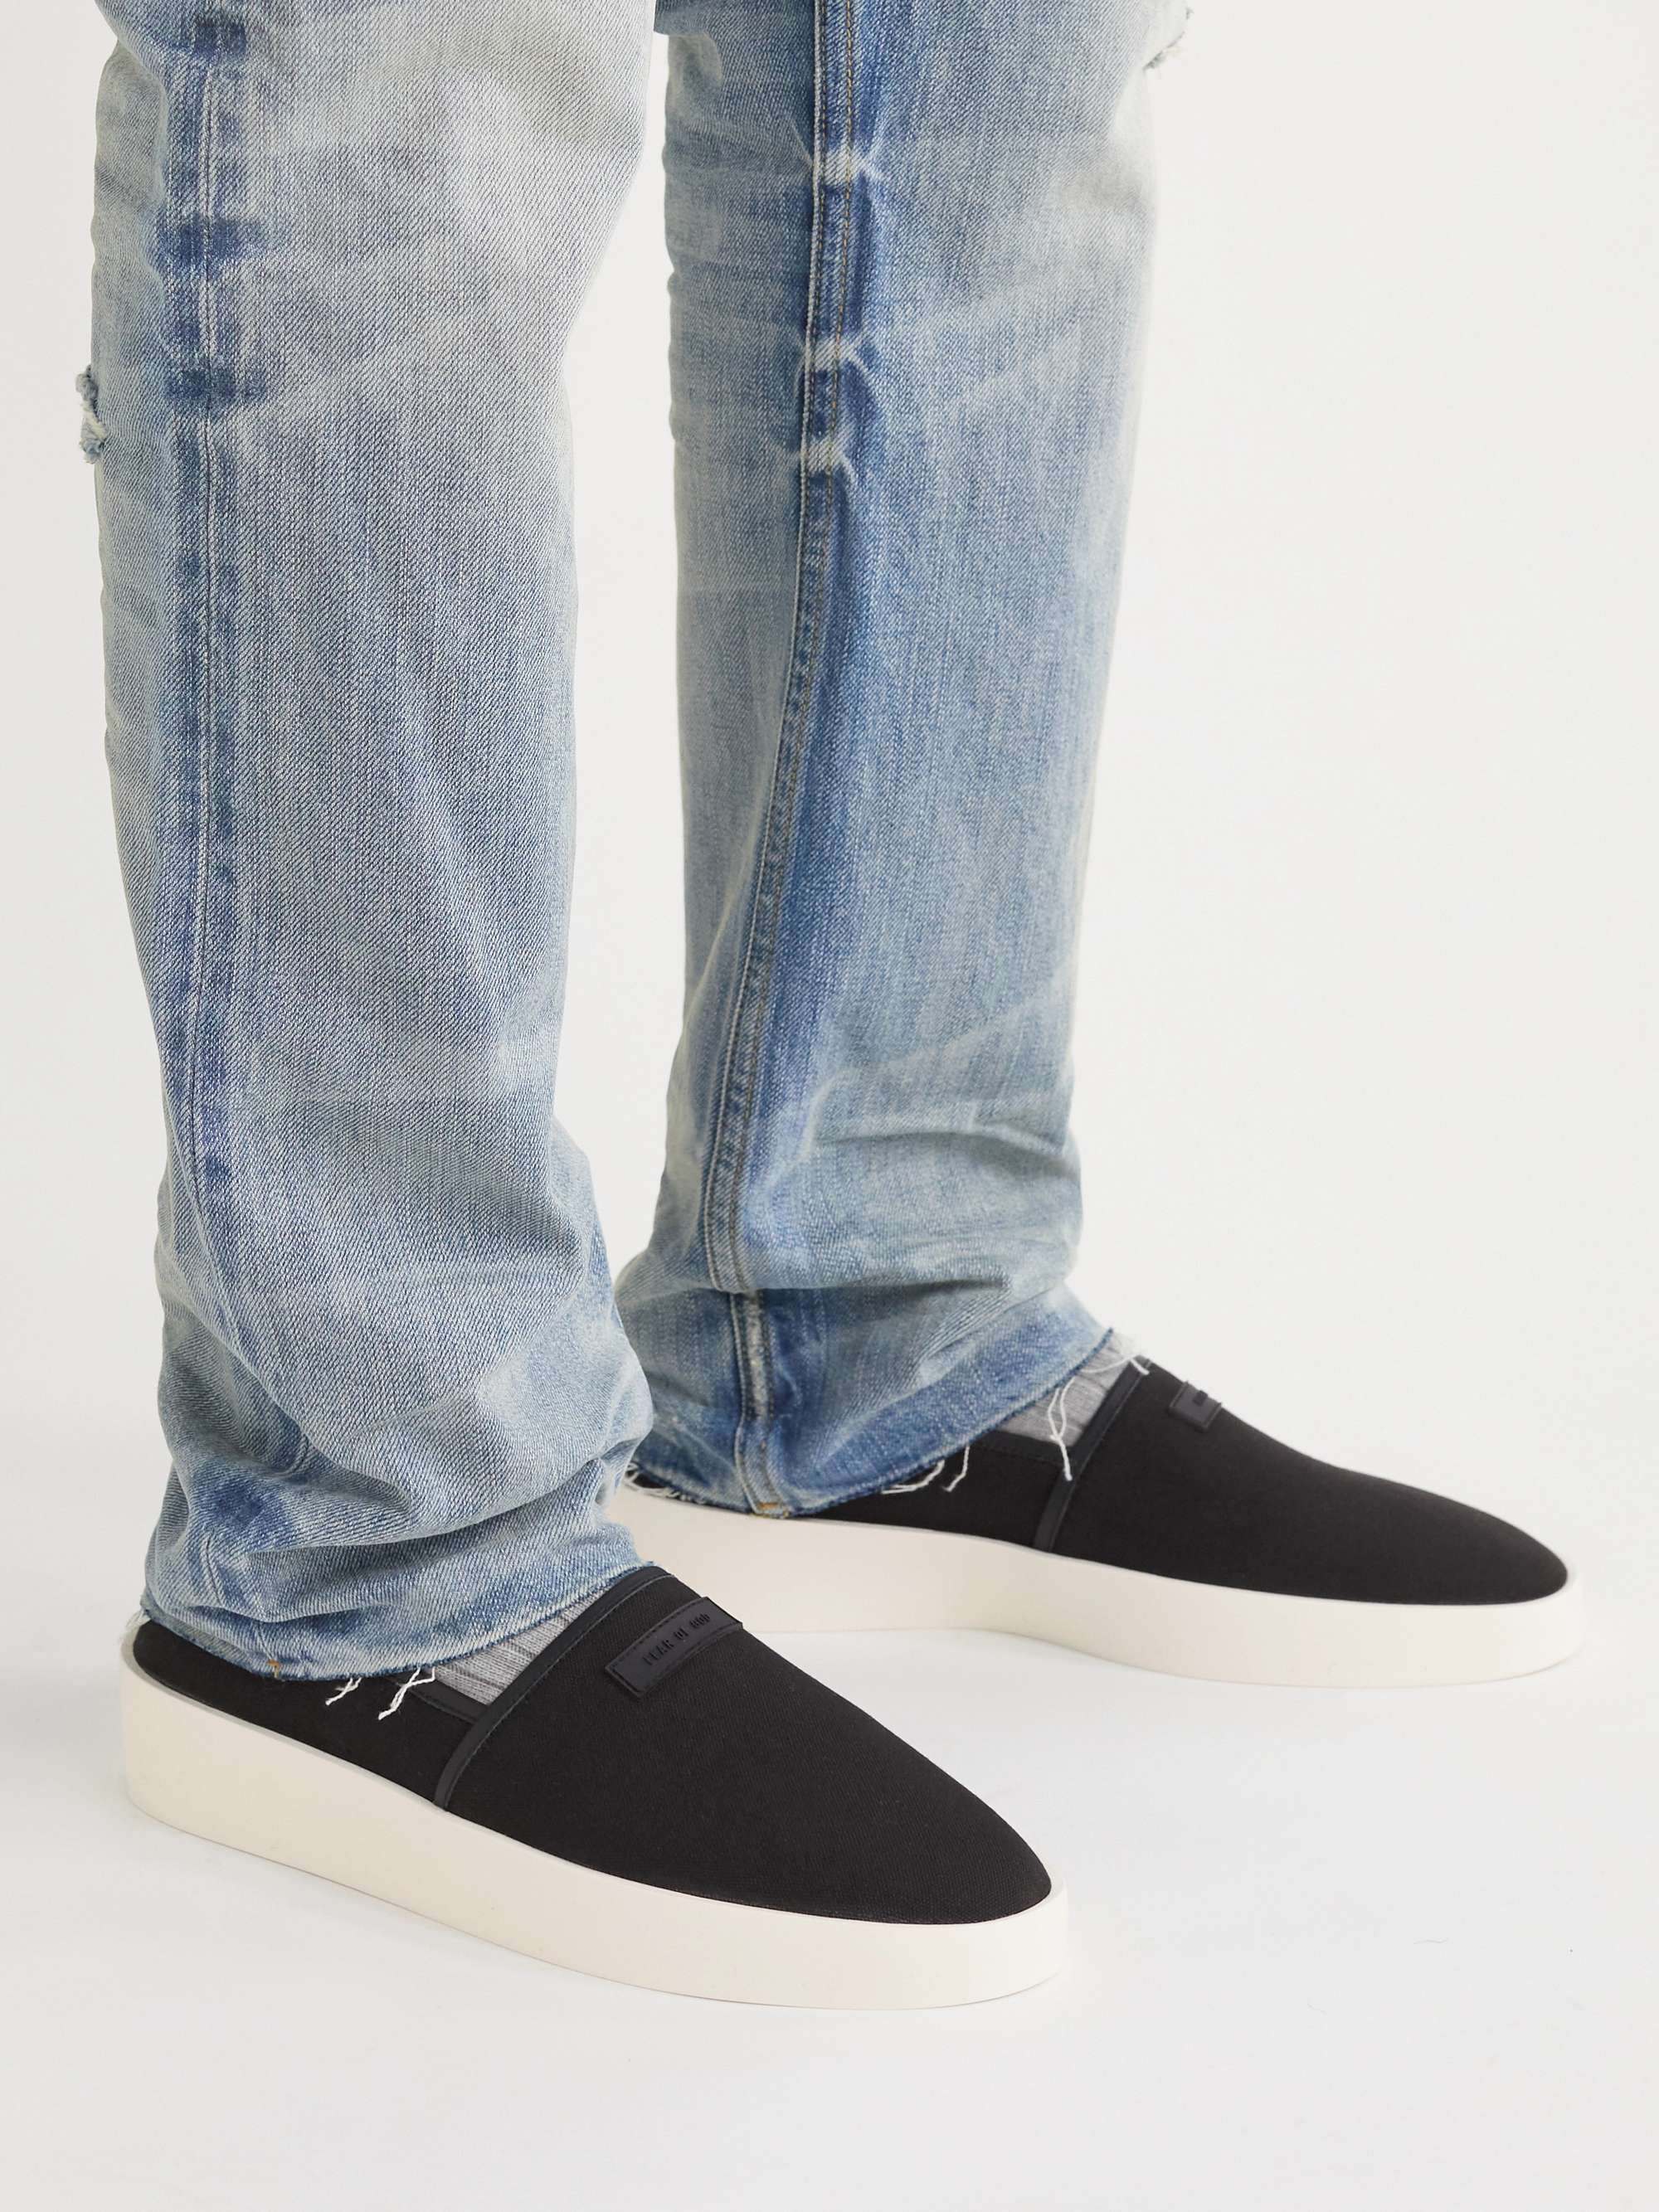 FEAR OF GOD Leather-Trimmed Canvas Espadrilles